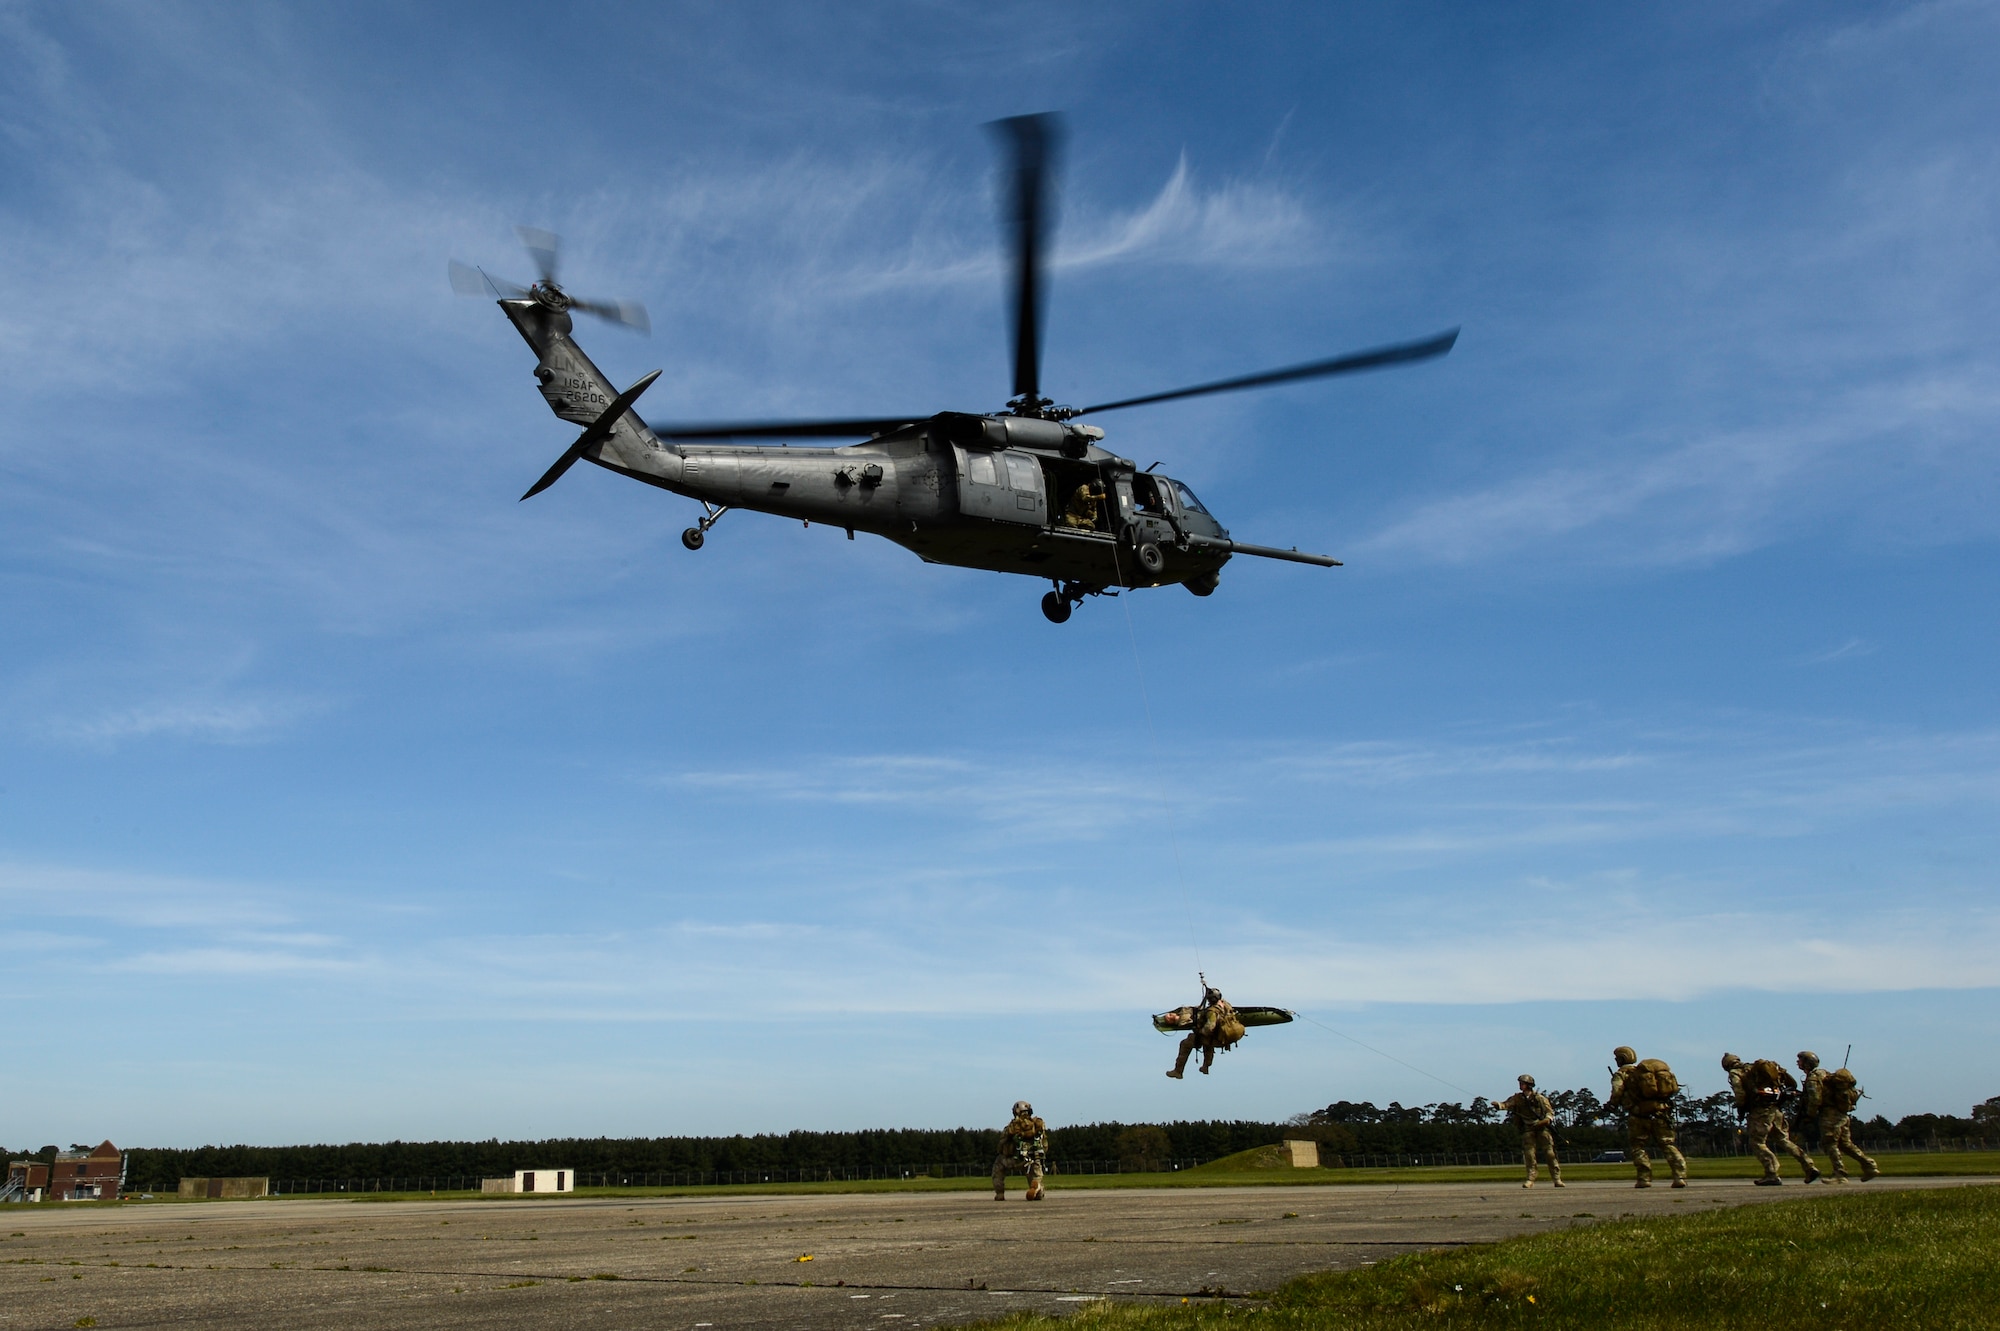 A group of pararescuemen with the 57th Rescue Squadron hoist a simulated injured Airman onto an HH-60 Pave Hawk from the 56th Rescue Squadron at Royal Air Force Lakenheath, England, as they conduct a combat search and rescue demonstration April 21, 2016, for a group of Air Force civic leaders, who serve as unpaid advisers, key communicators and advocates for the Air Force. (U.S. Air Force photo/Tech. Sgt. Joshua DeMotts)